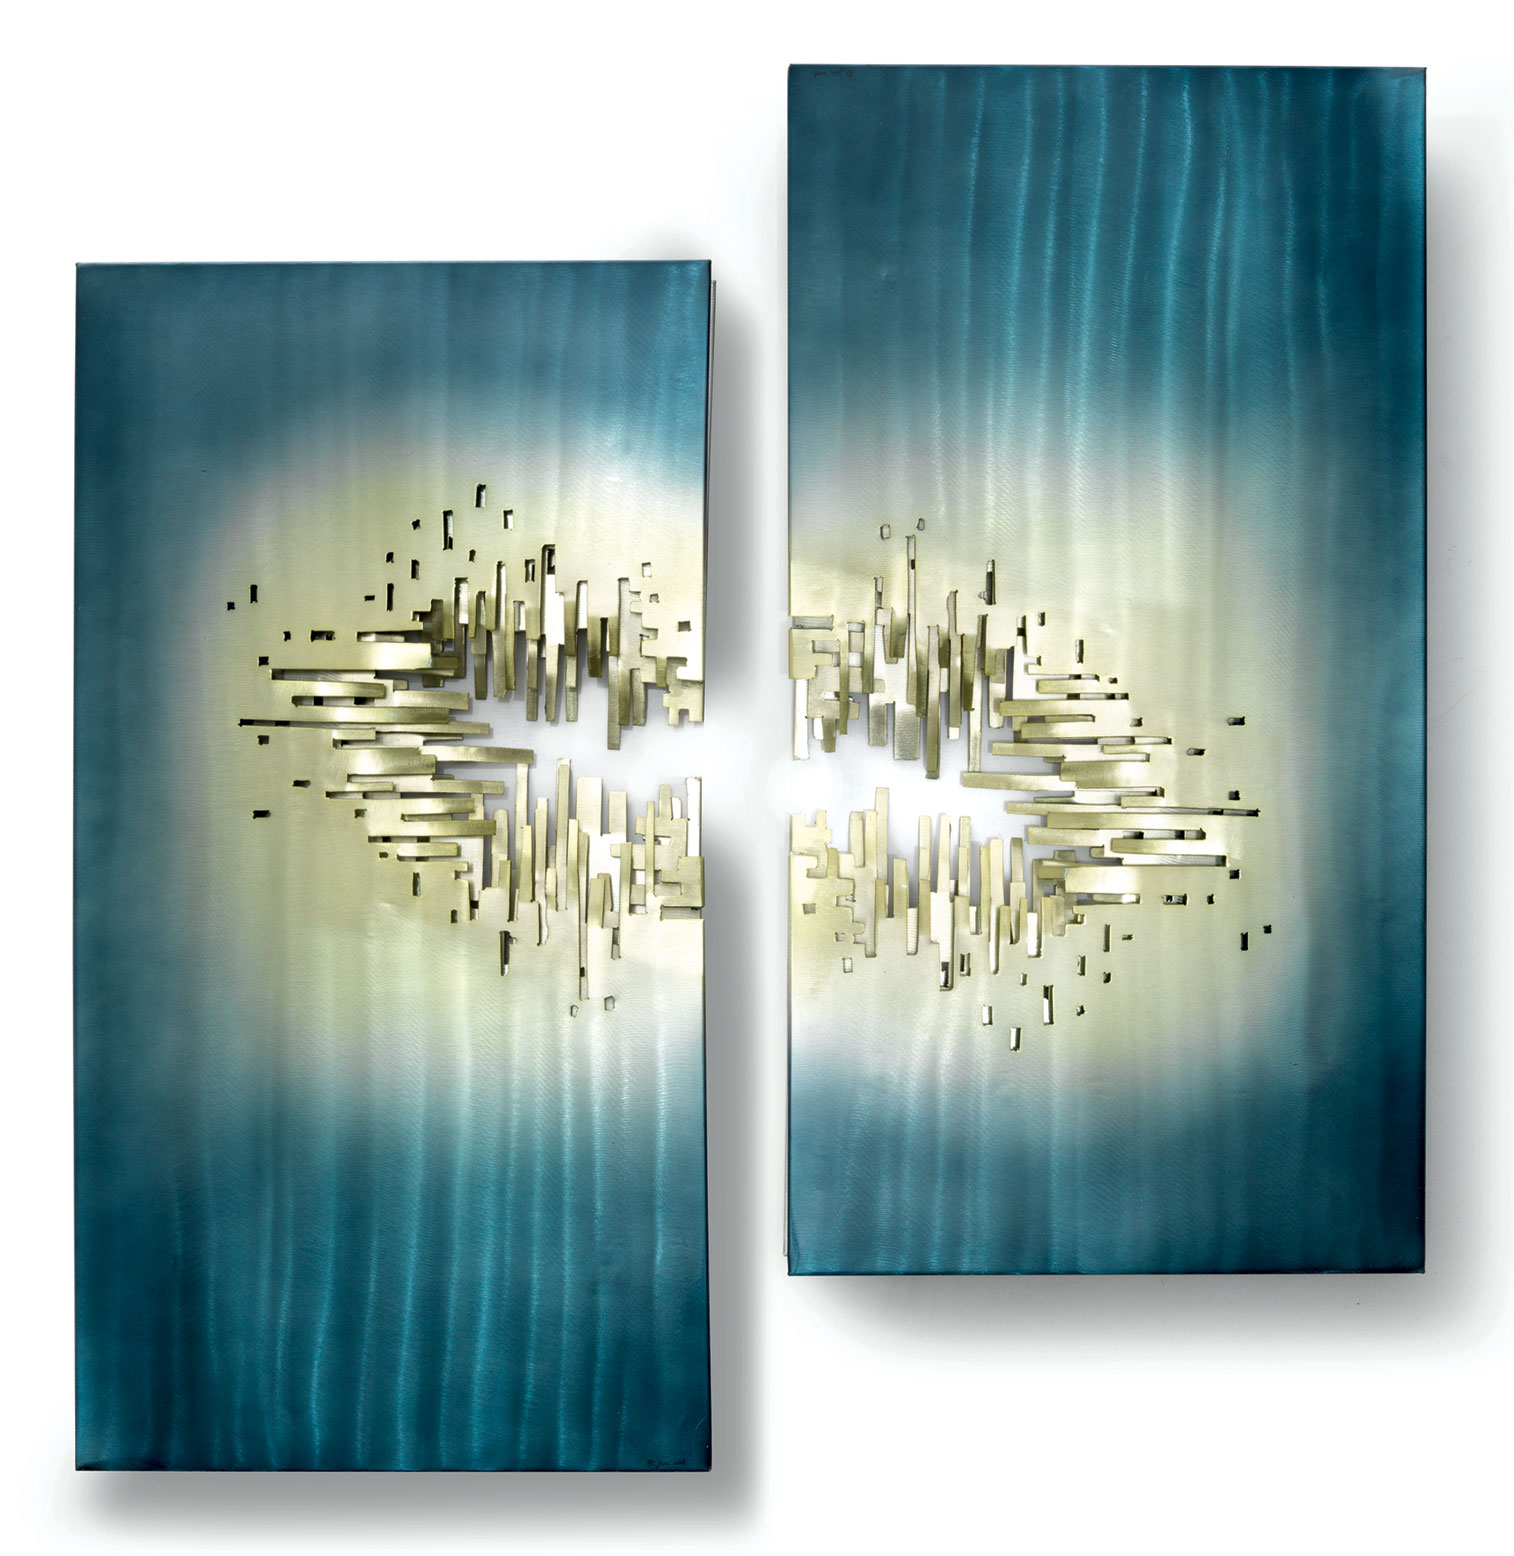 Set of 2 wall sculptures "From the Depth" by C. Jeré